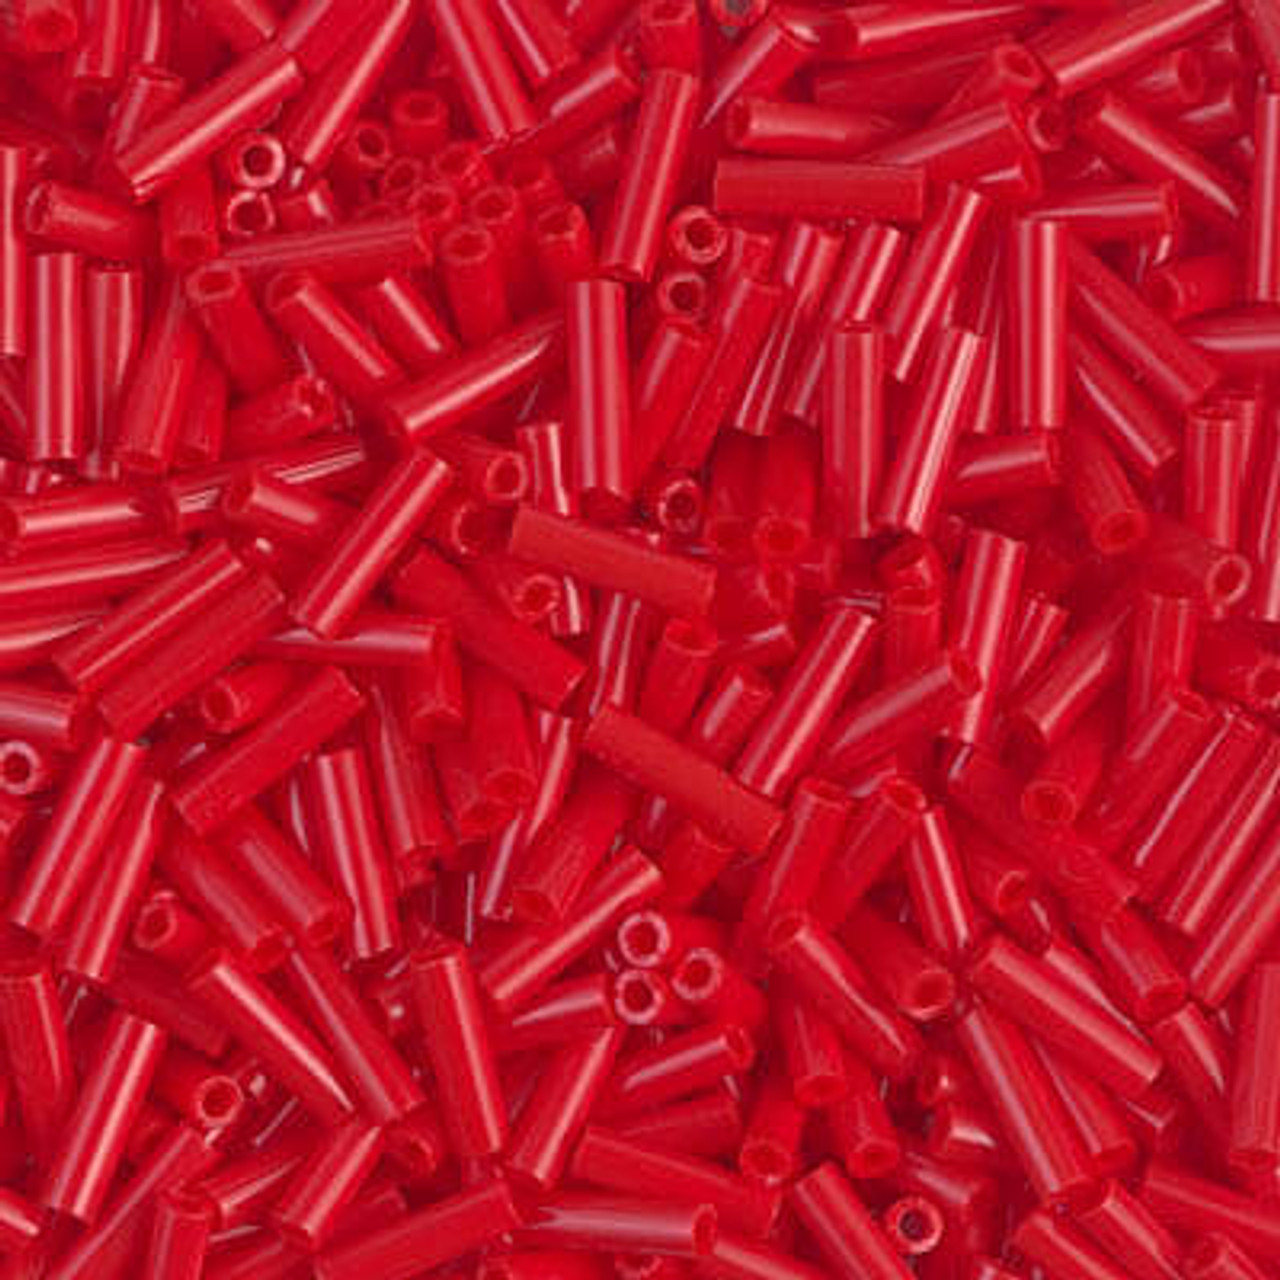 Red Beads Brick Red Beads 6mm Glass Beads 6mm Beads BULK Beads Wholesale  Beads 136 pieces Bulk Bead Unique Glass Beads